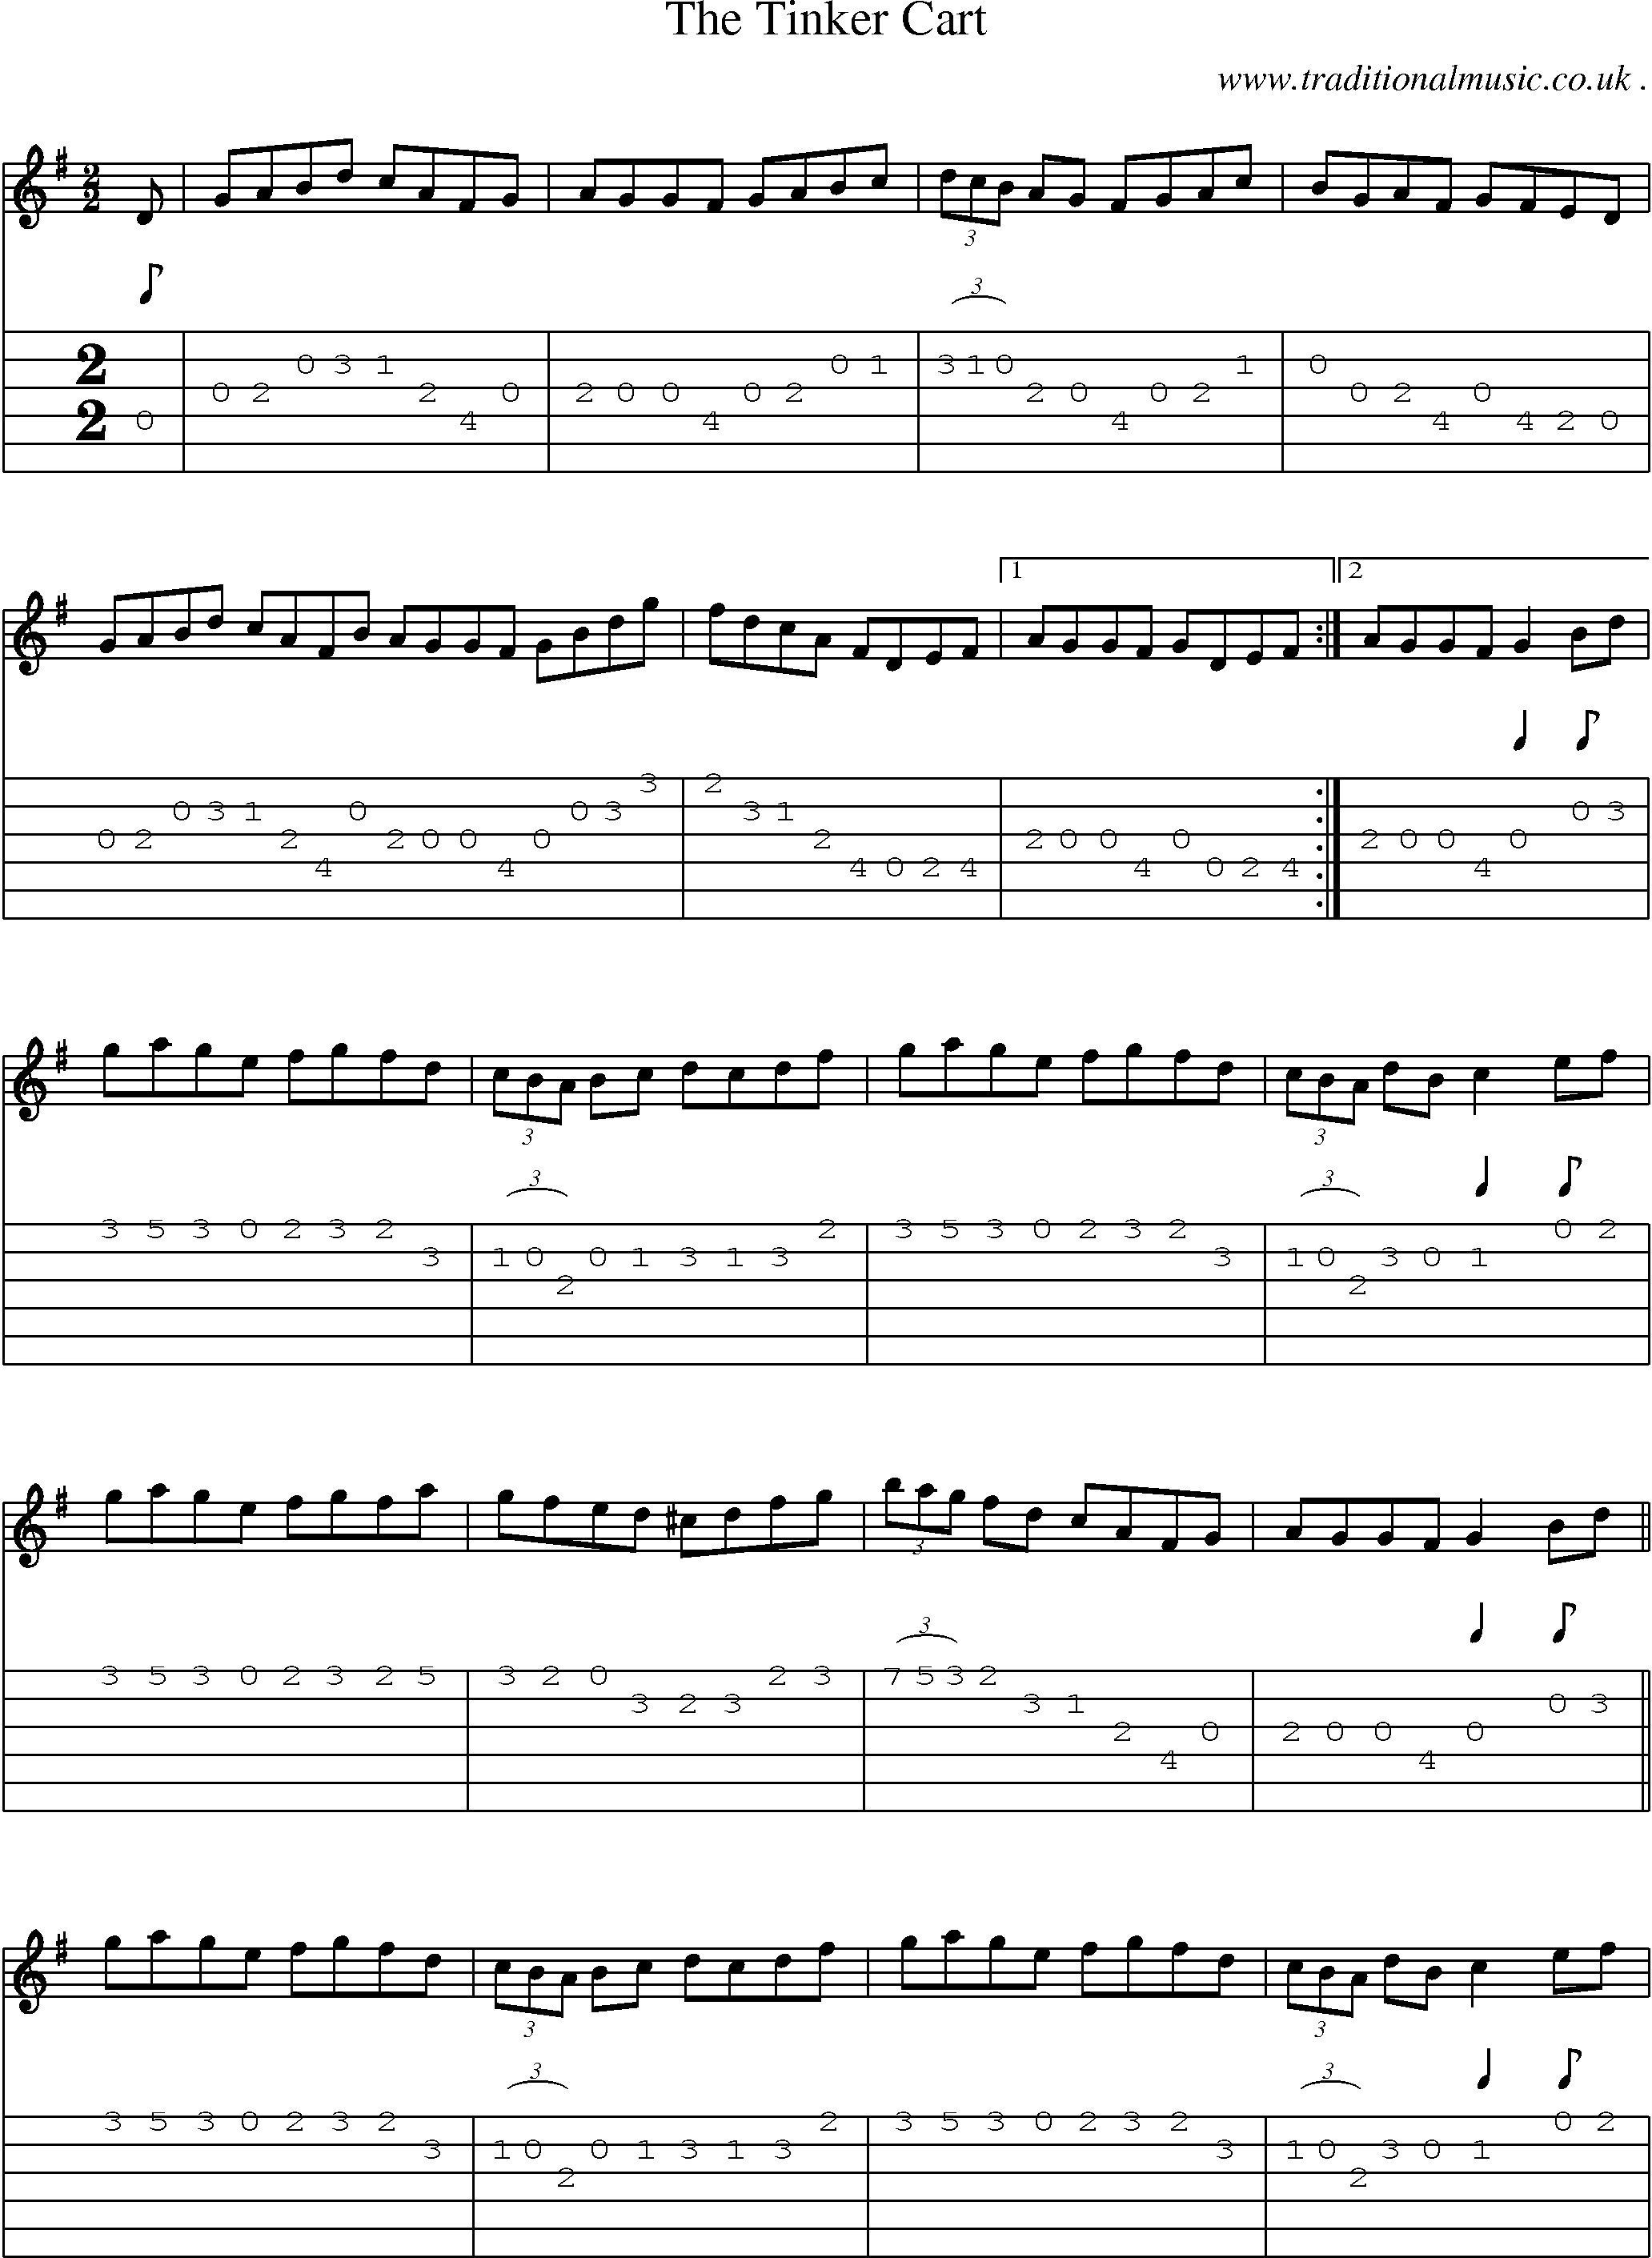 Sheet-Music and Guitar Tabs for The Tinker Cart